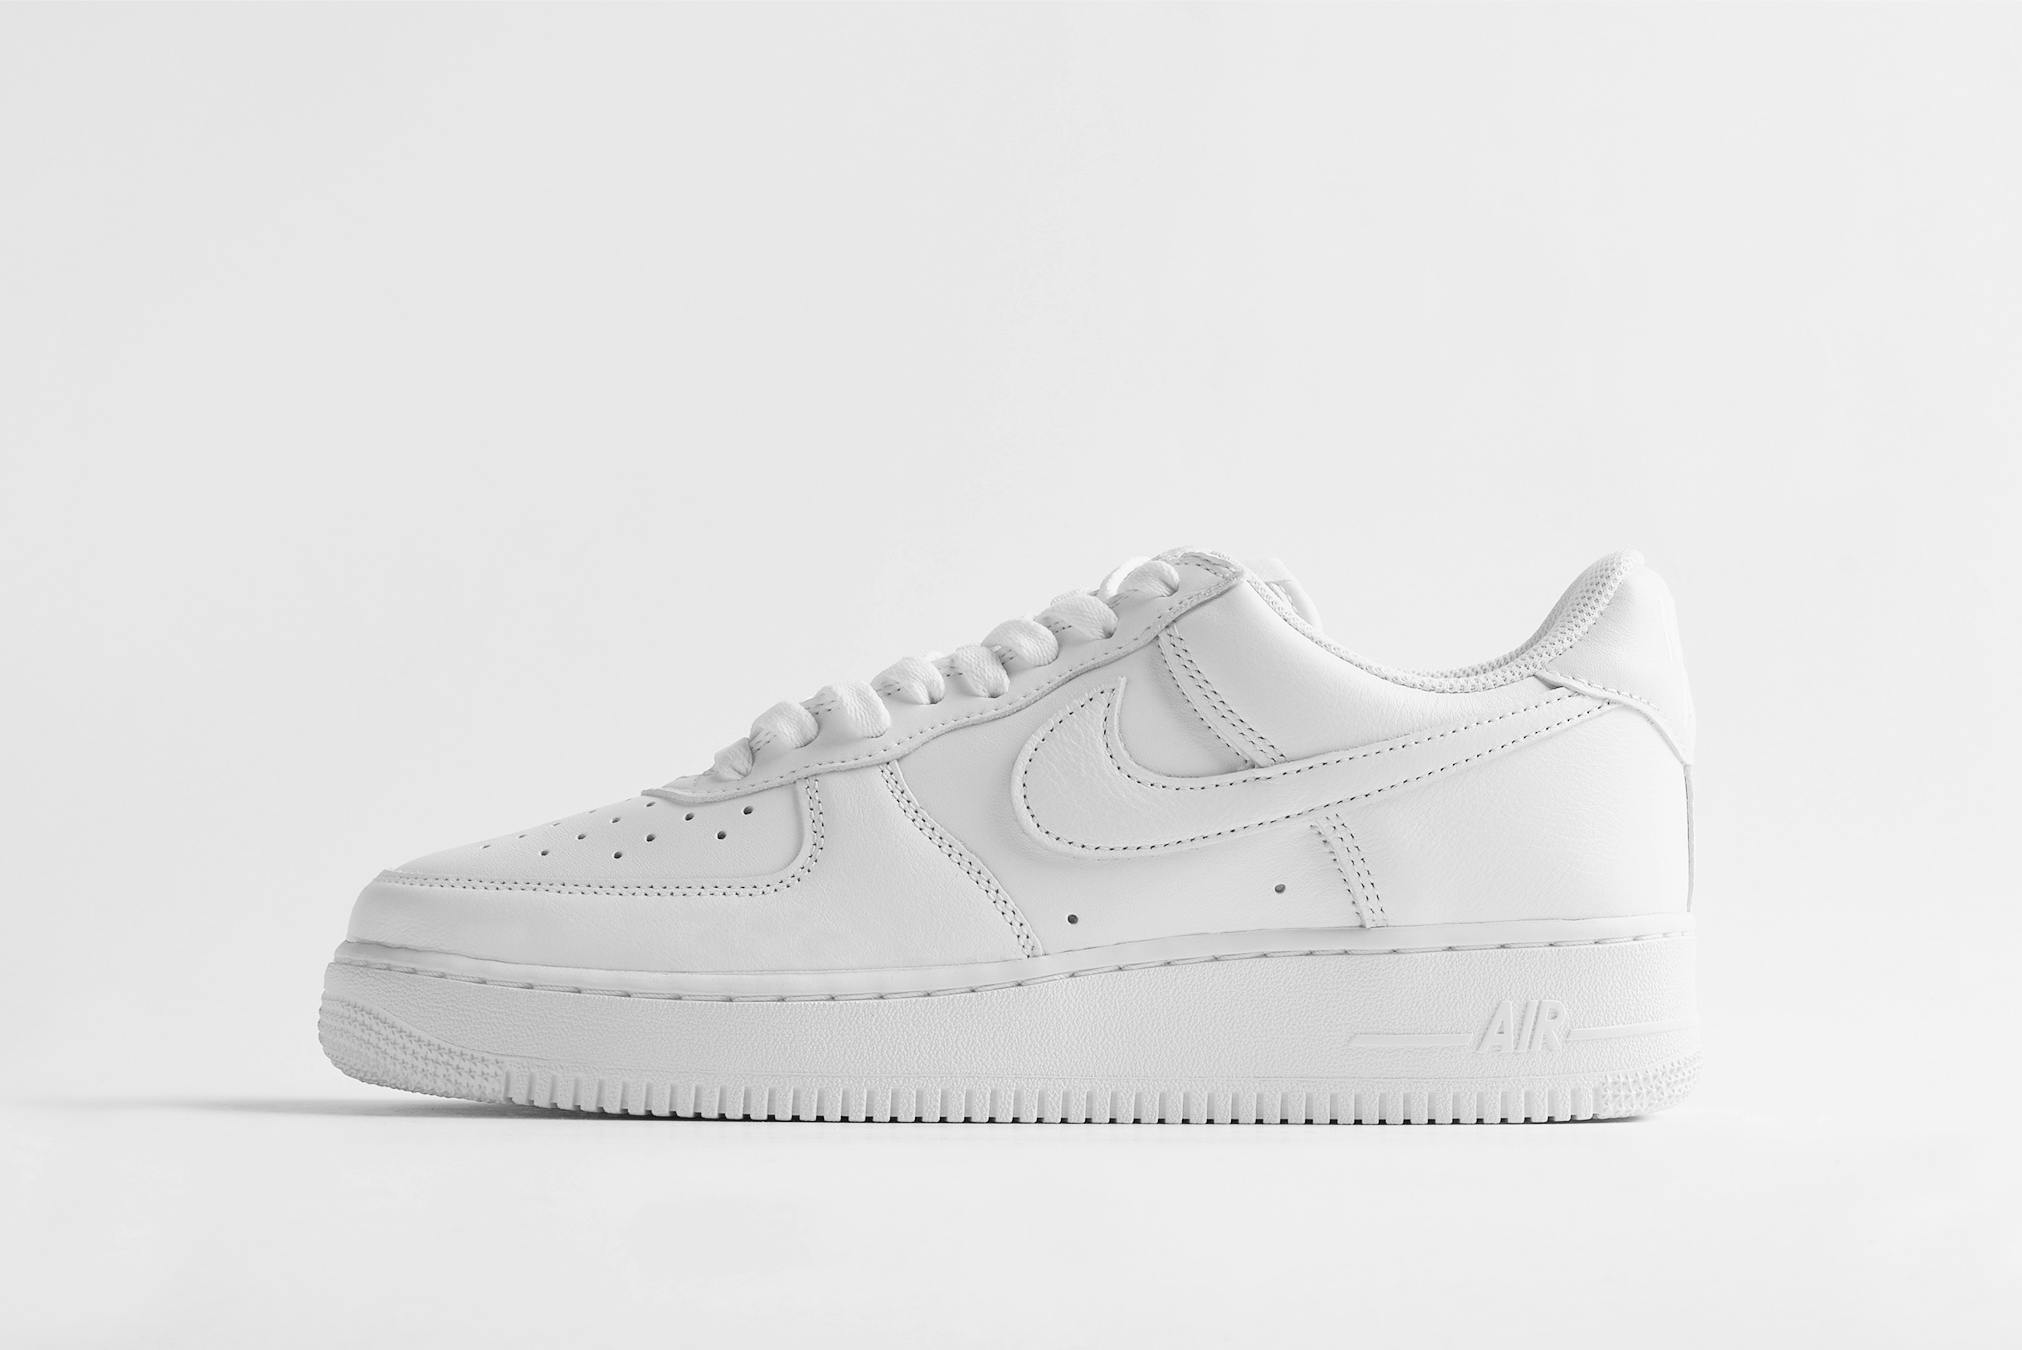 The Mismatched Nike Air Force 1 Low 82 Pays Homage To Classic Air